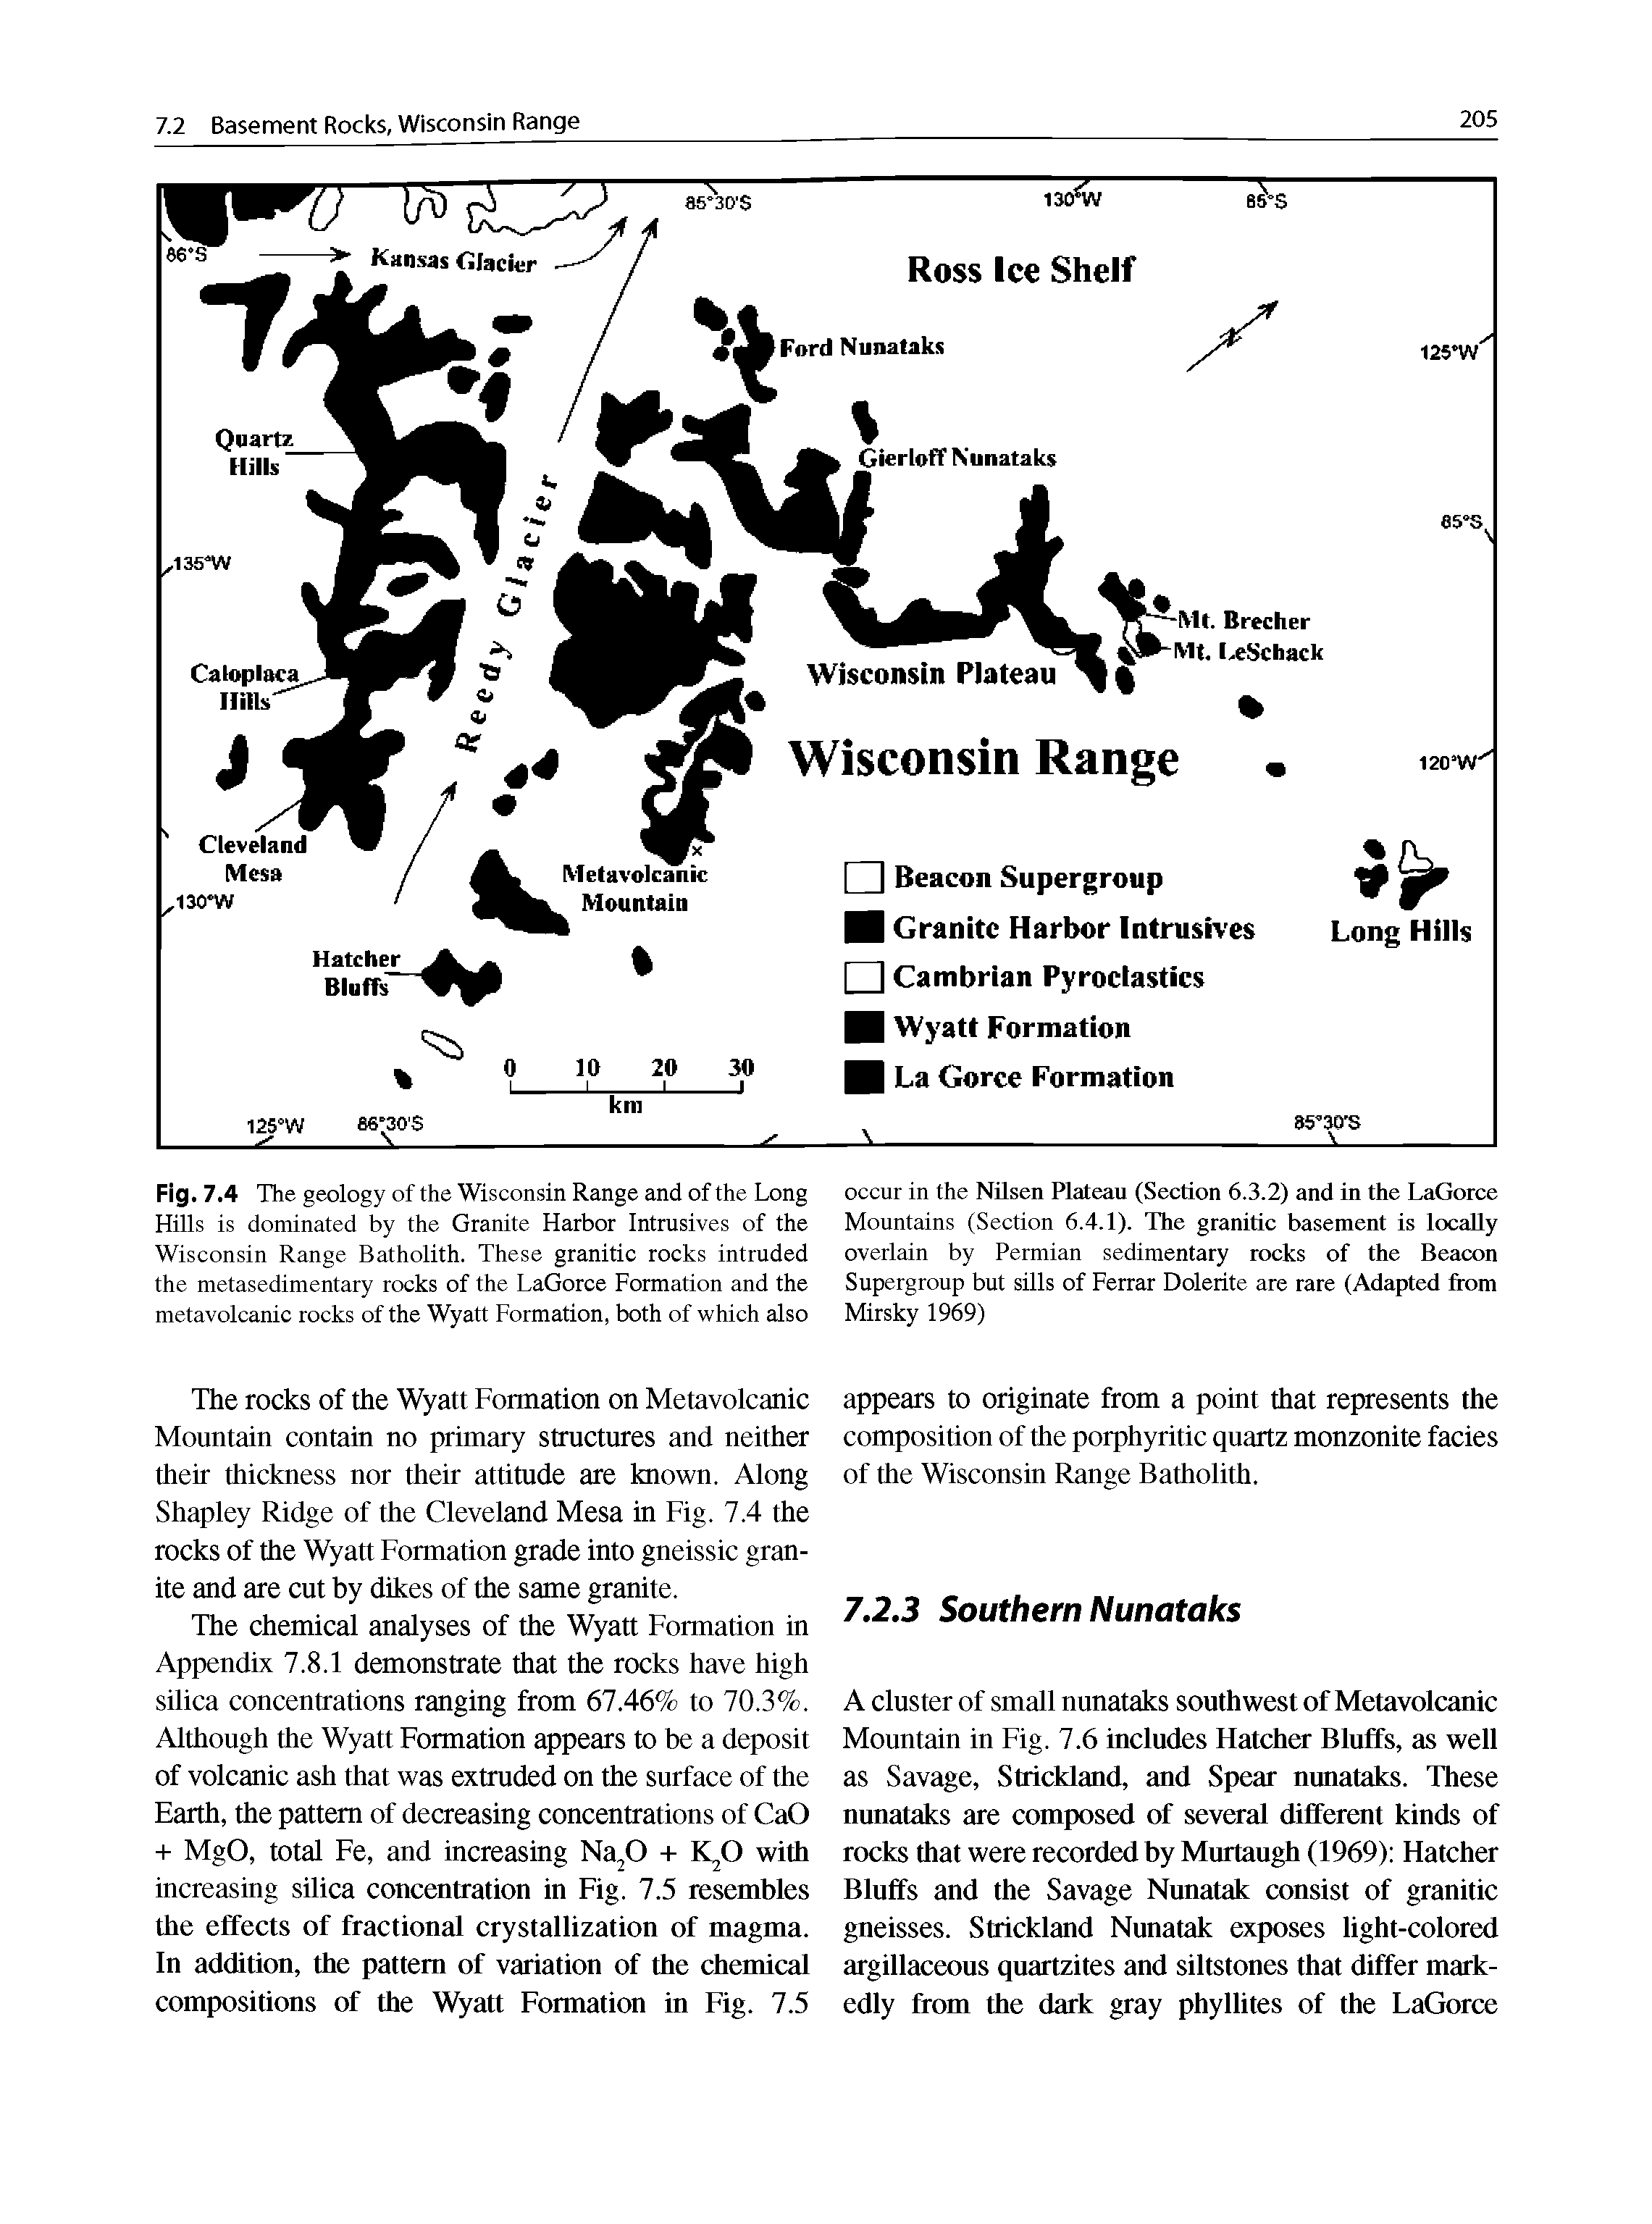 Fig. 7.4 The geology of the Wisconsin Range and of the Long Hills is dominated by the Granite Harbor Intrusives of the Wisconsin Range Batholith. These granitic rocks intruded the metasedimentary rocks of the LaGorce Formation and the metavolcanic rocks of the Wyatt Formation, both of which also...